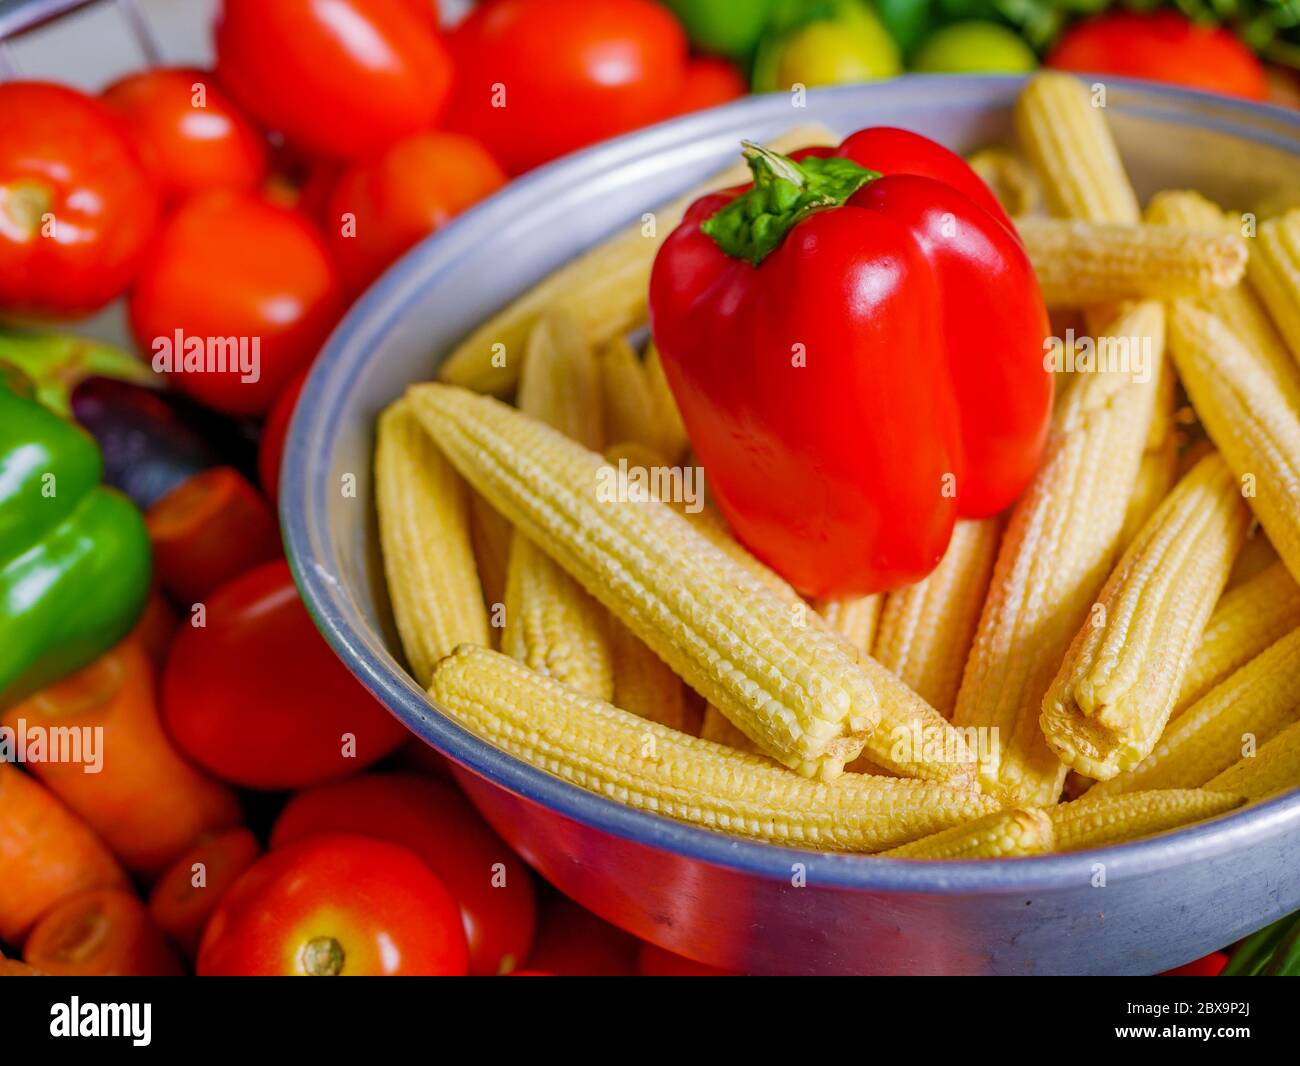 Red Capsicum and Baby corns arranged in a basket with tomatoes and green veggies in background Stock Photo